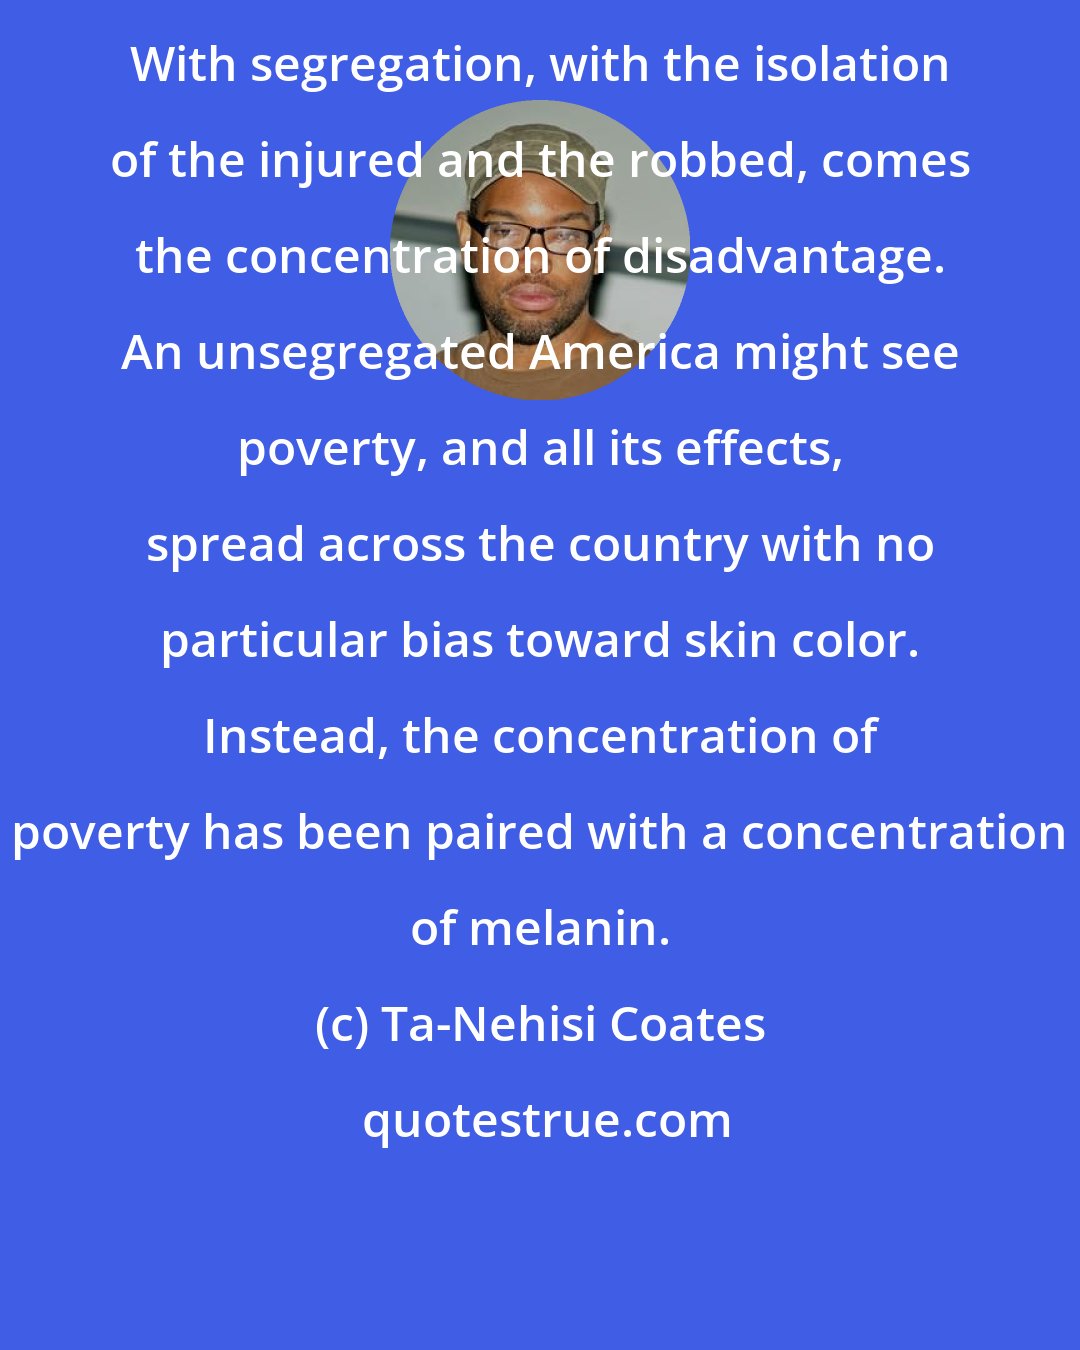 Ta-Nehisi Coates: With segregation, with the isolation of the injured and the robbed, comes the concentration of disadvantage. An unsegregated America might see poverty, and all its effects, spread across the country with no particular bias toward skin color. Instead, the concentration of poverty has been paired with a concentration of melanin.